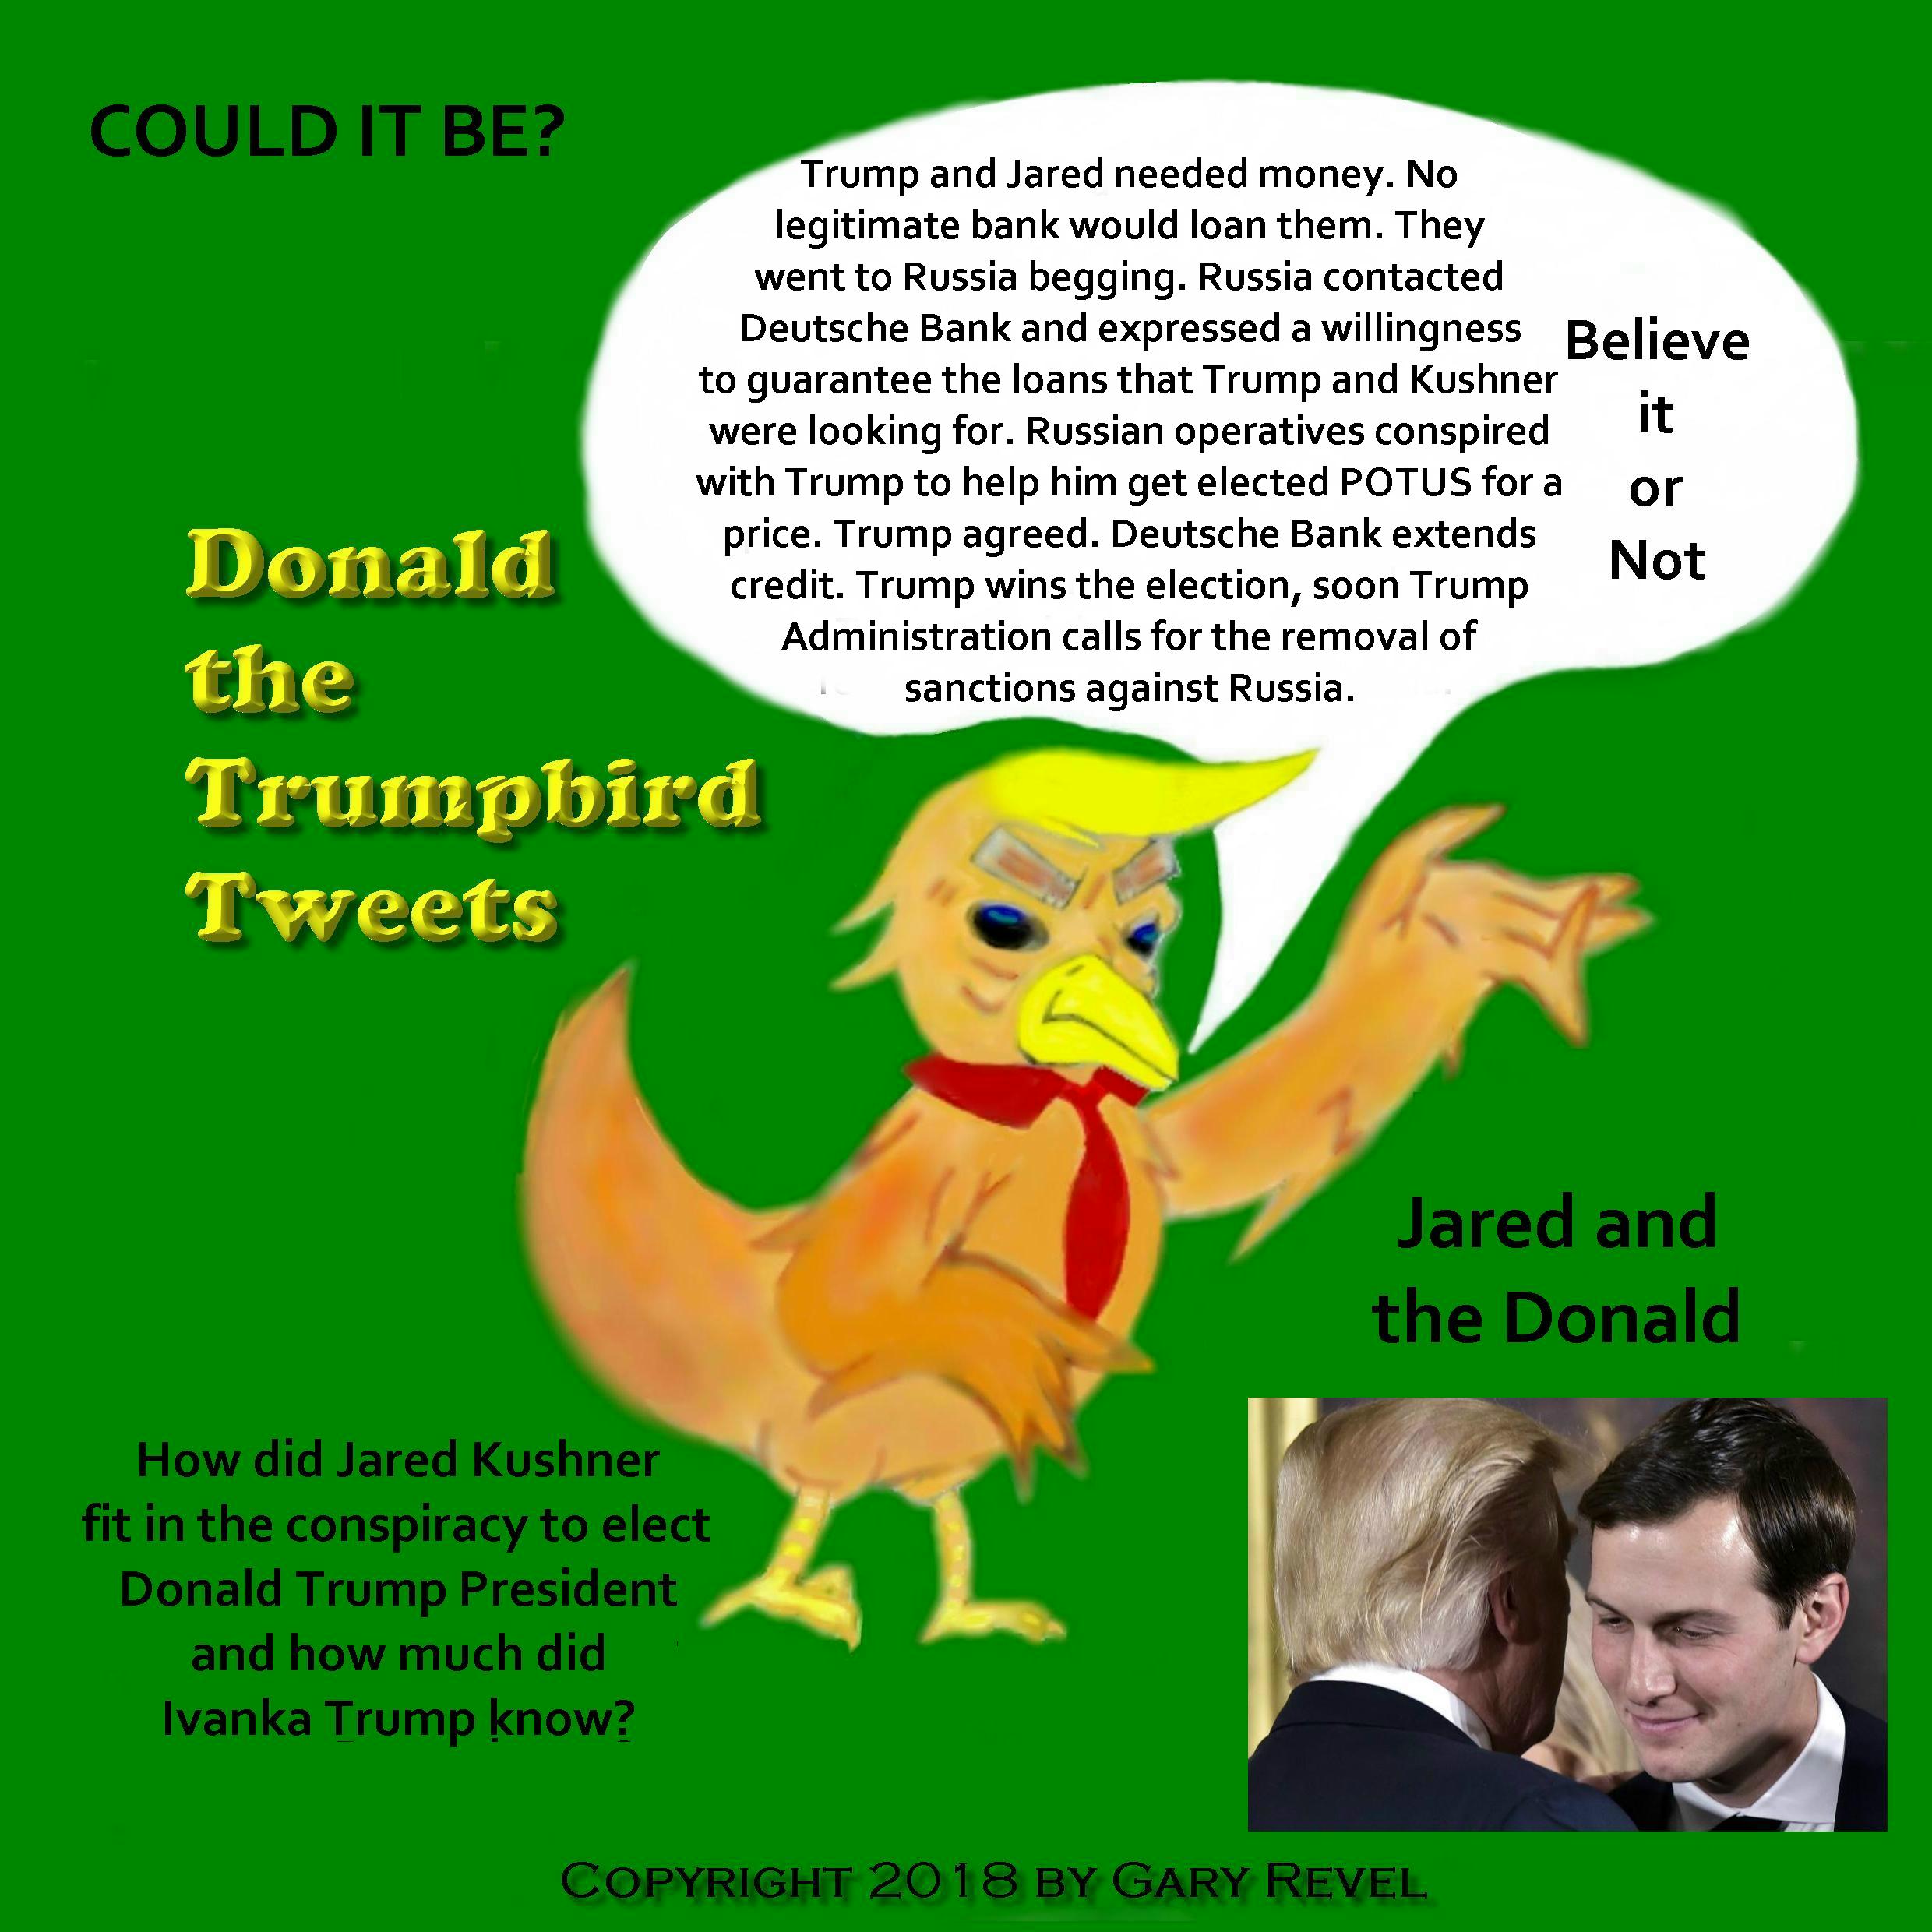 Donald the Trumpbird tweets Jared and Trump knows what?